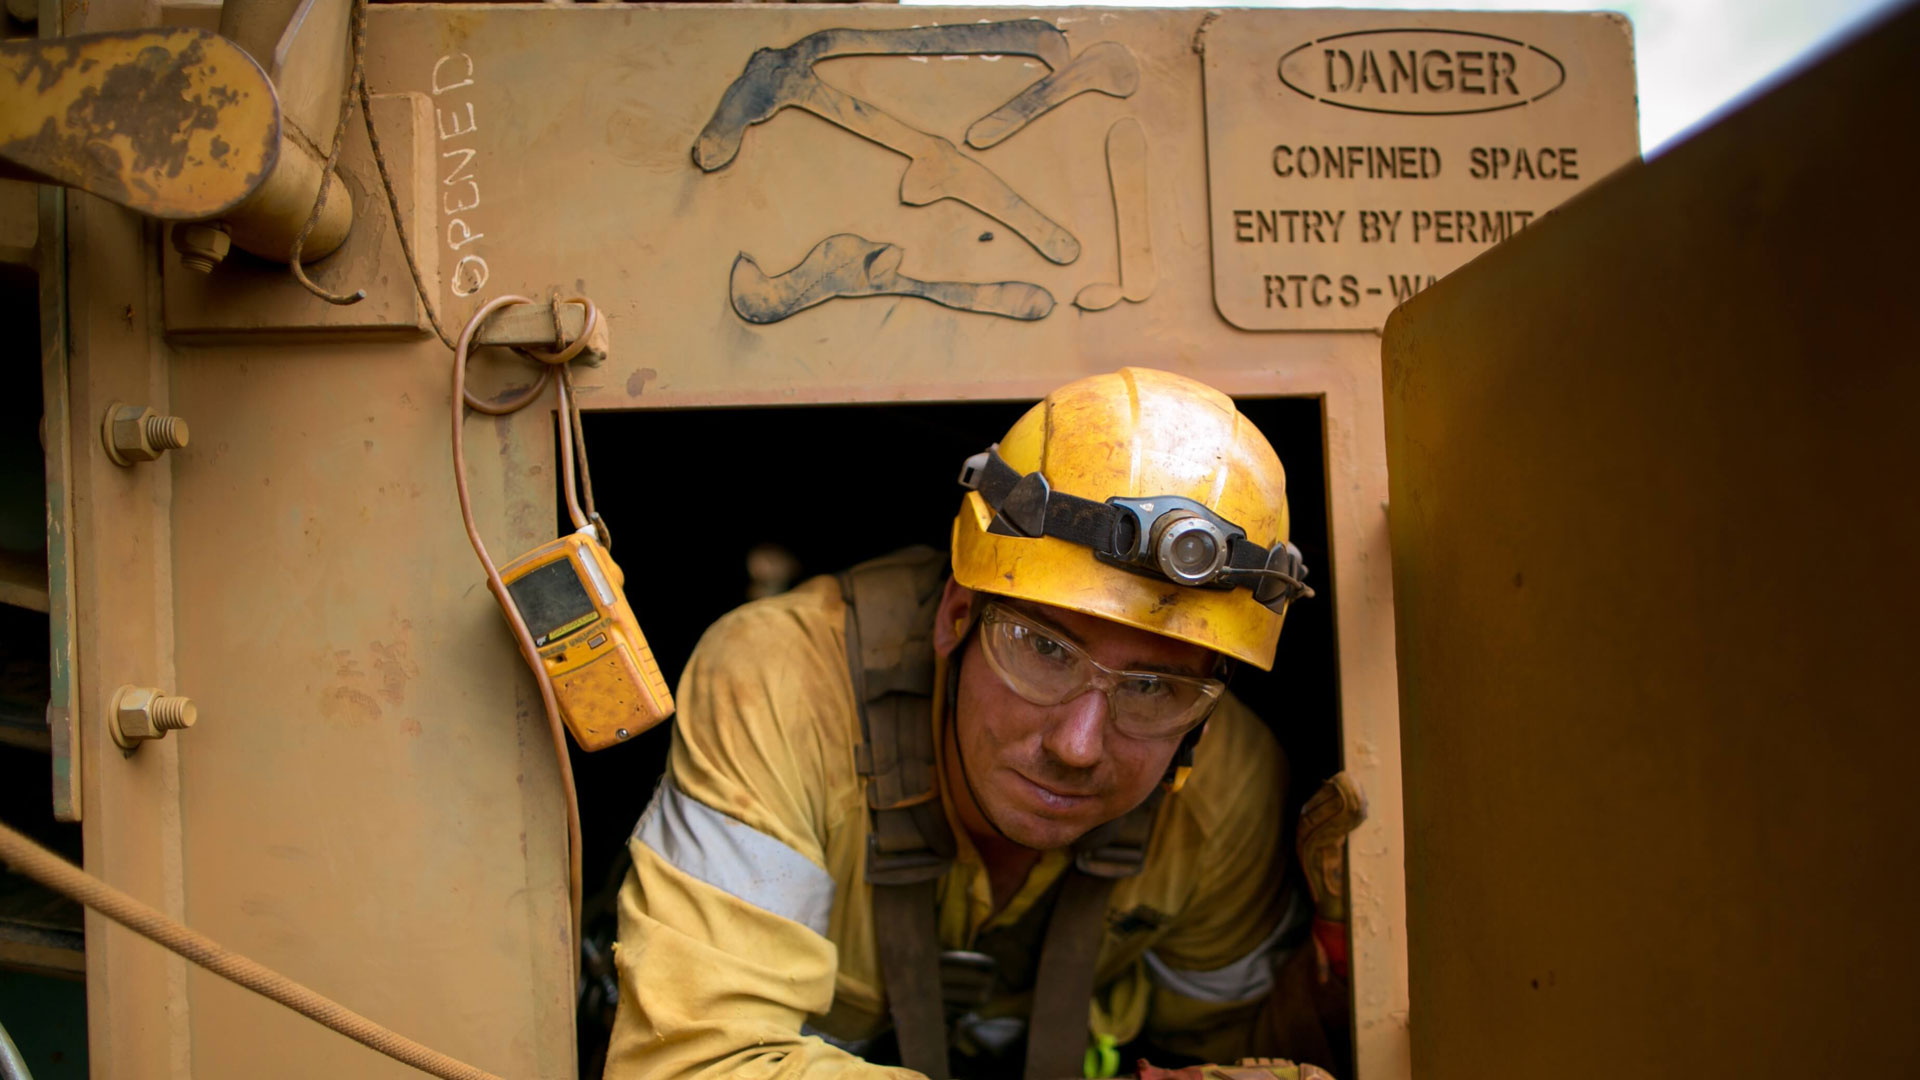 Course Set – RIIWHS202E & MSMWHS217 – Enter and Work in Confined Spaces & Gas Testing